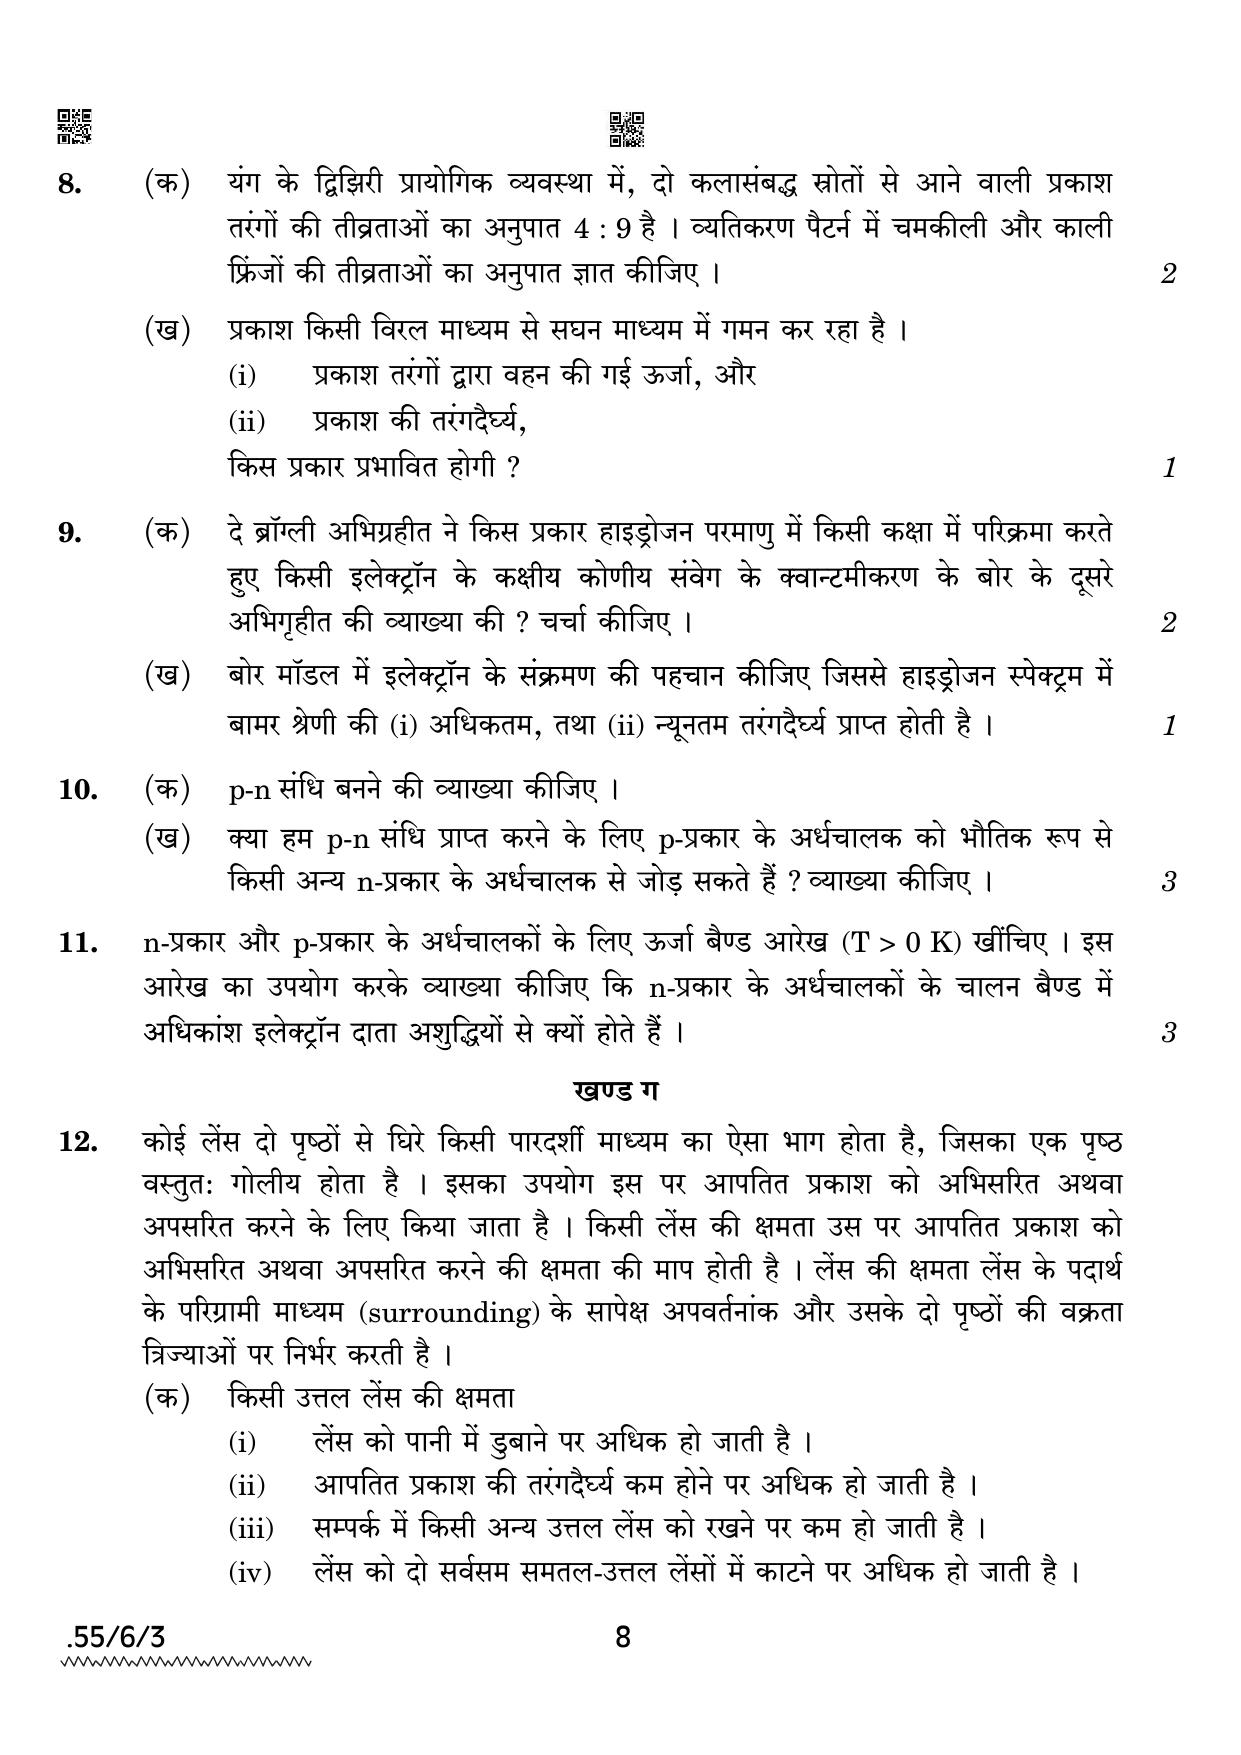 CBSE Class 12 55-6-3 PHYSICS 2022 Compartment Question Paper - Page 8